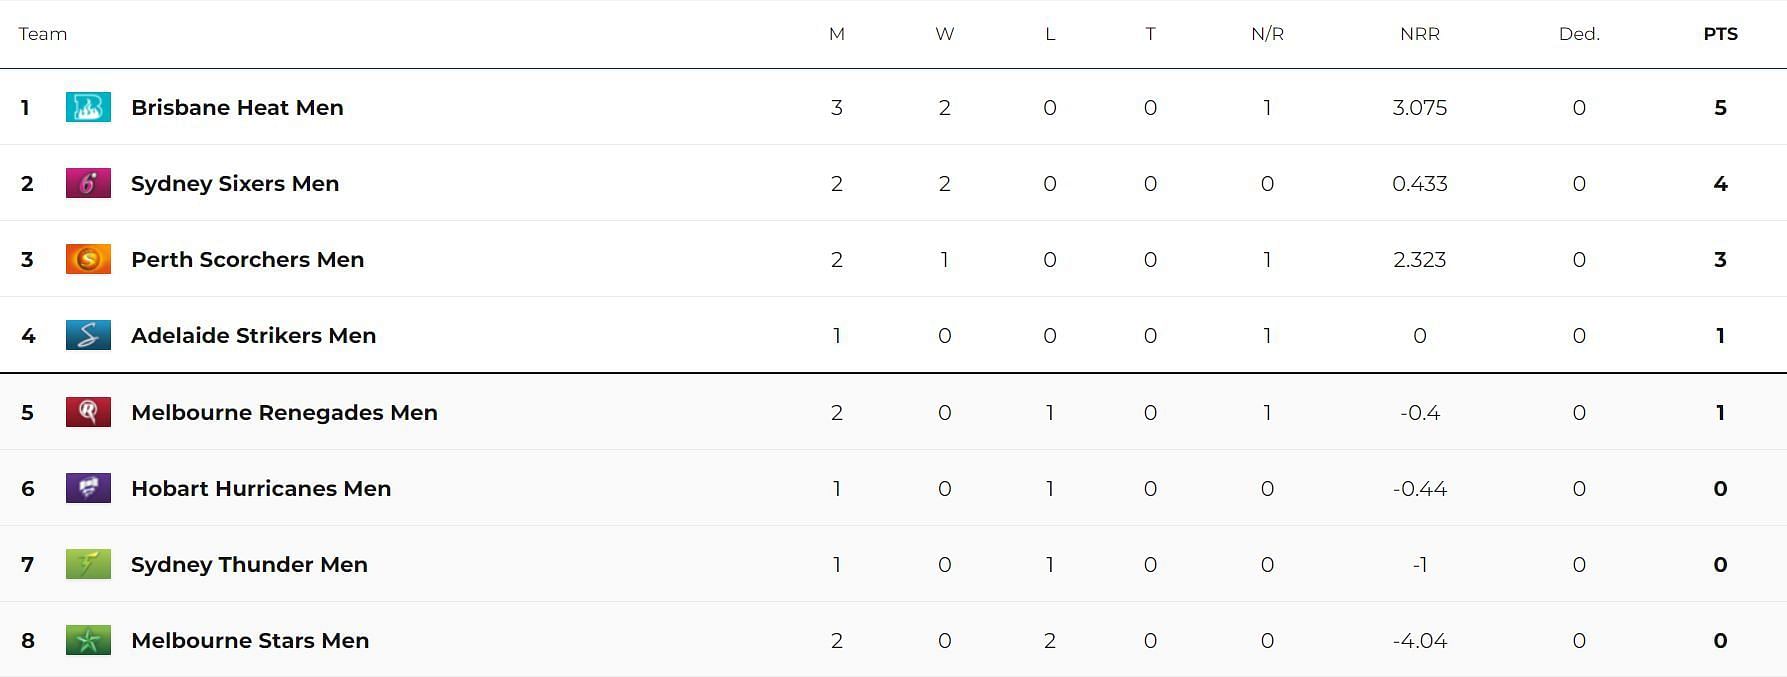 Updated Points Table after Match 7 (Image Courtesy: cricket.com.au)